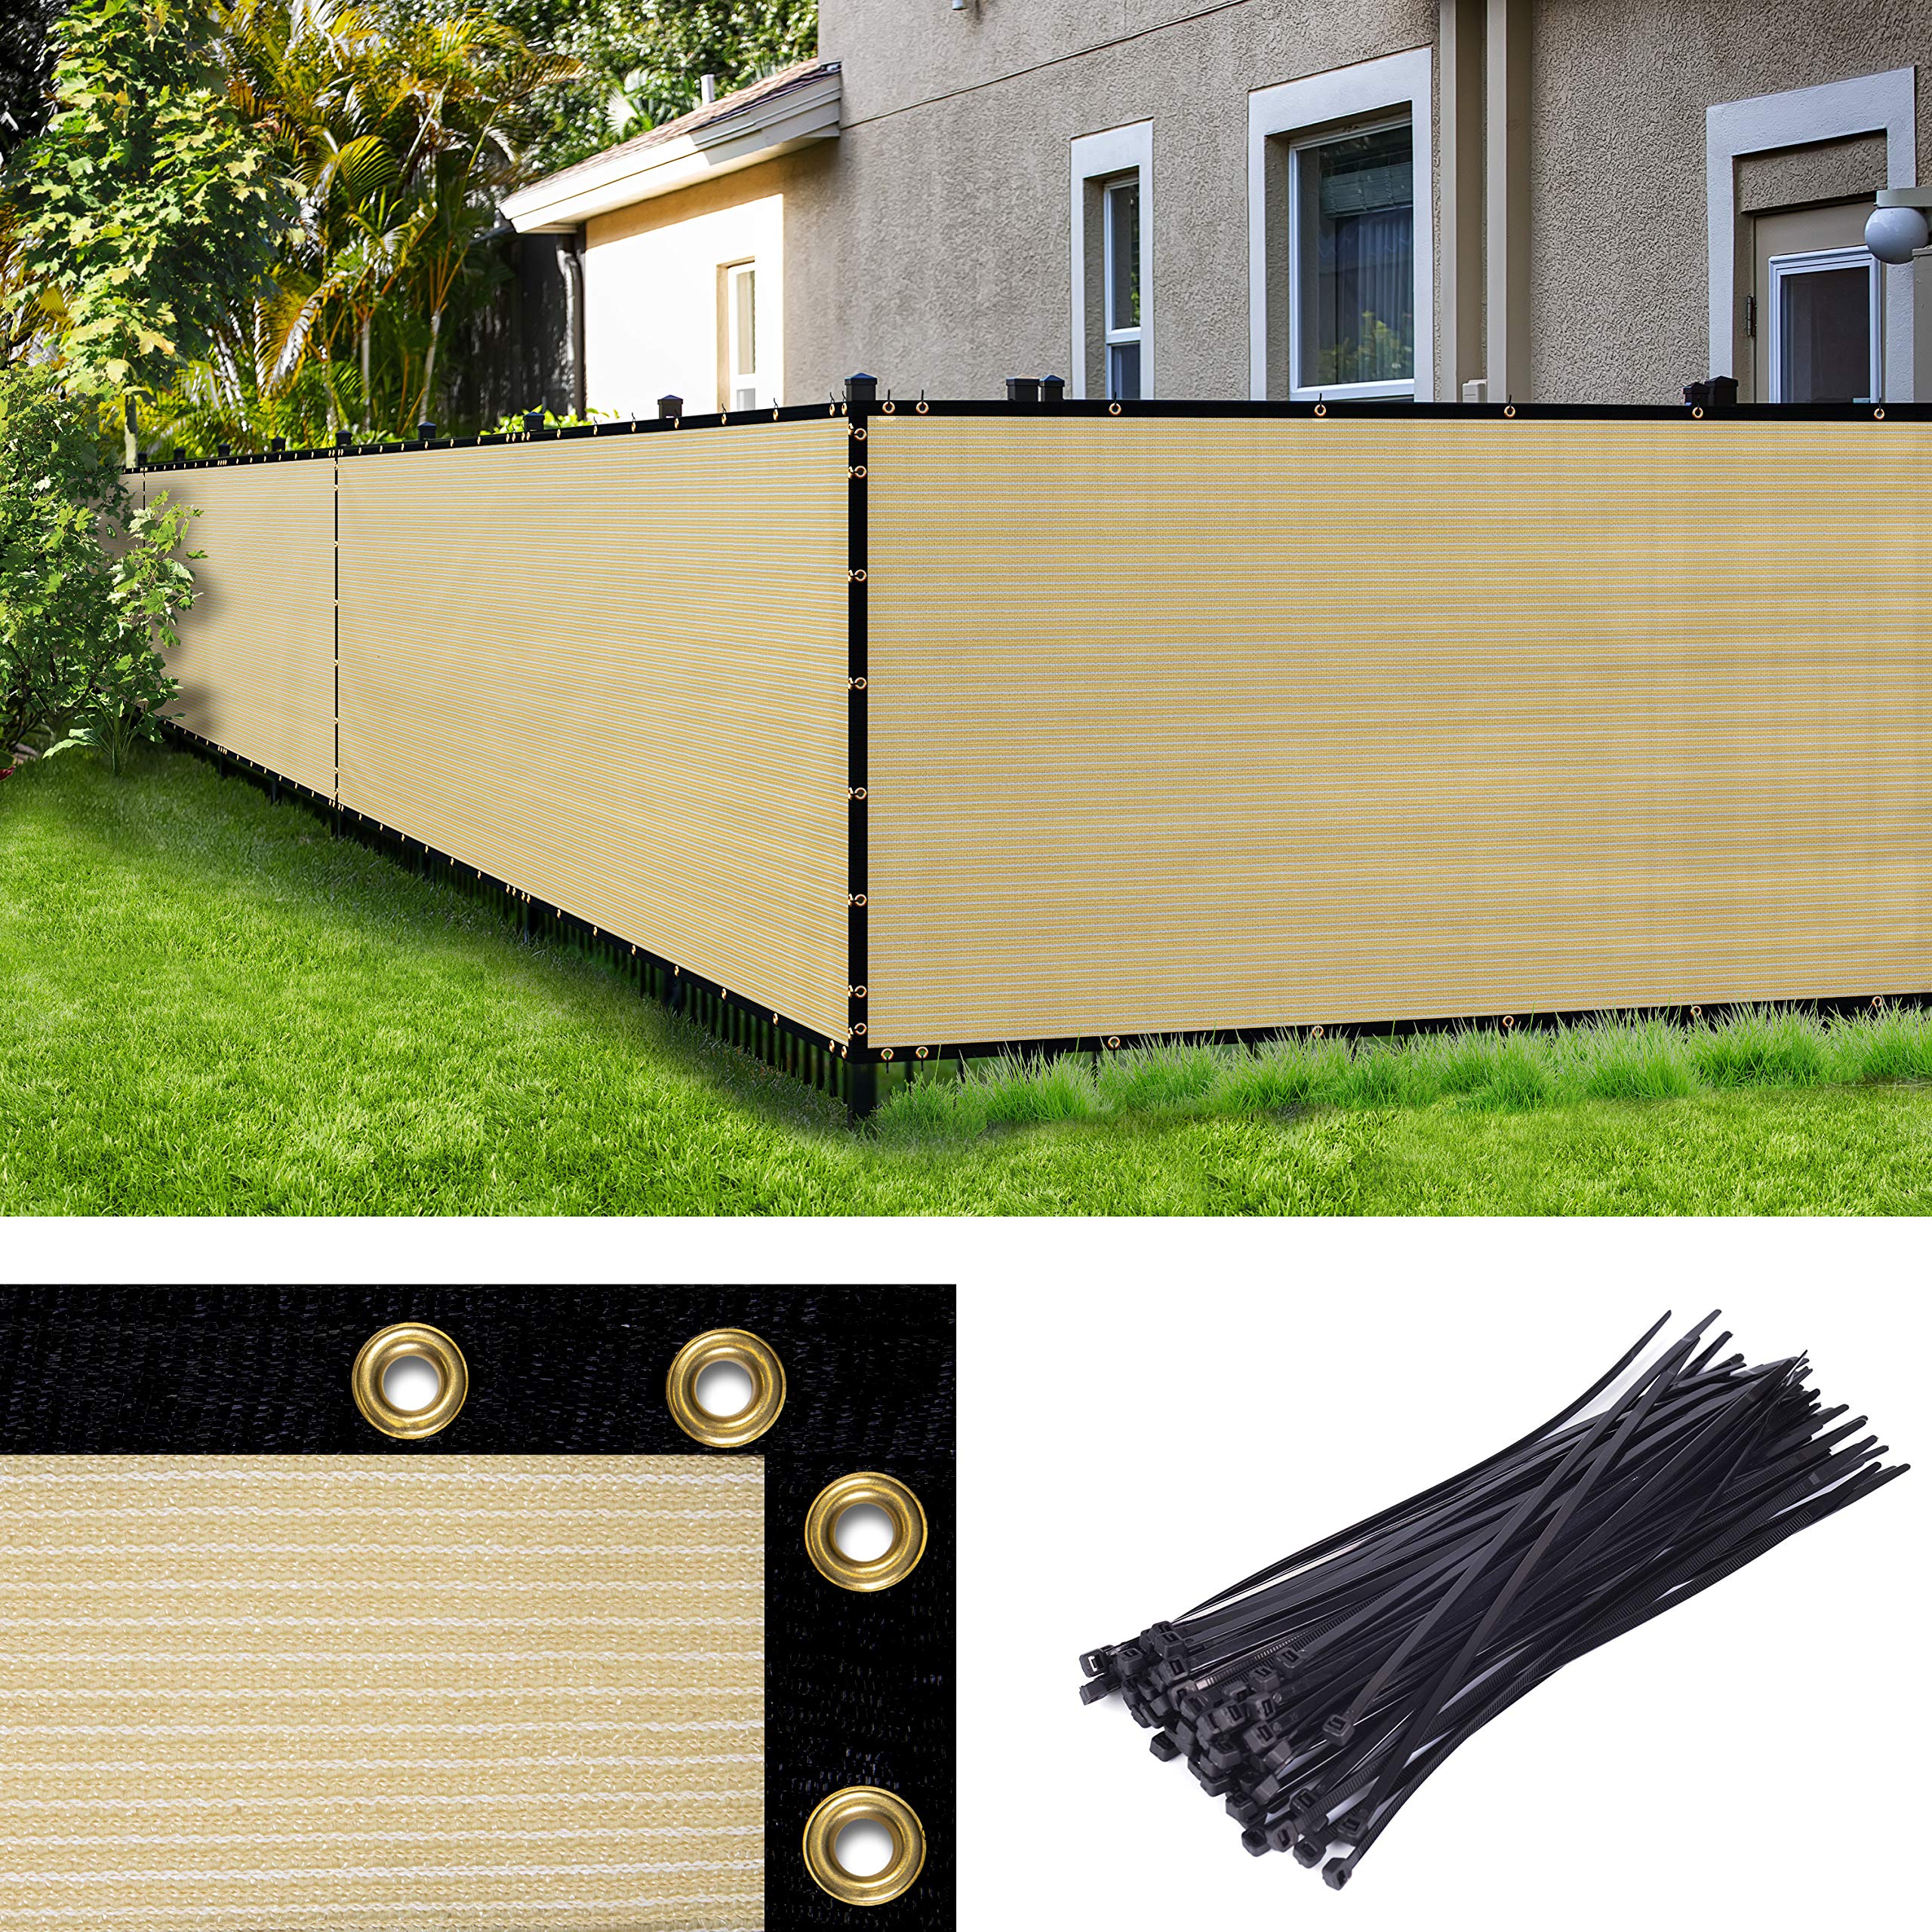 Amgo custom Made 6 x 164 custom Size Beige Fence Privacy Screen Windscreen,with Bindings & grommets Heavy Duty for comme